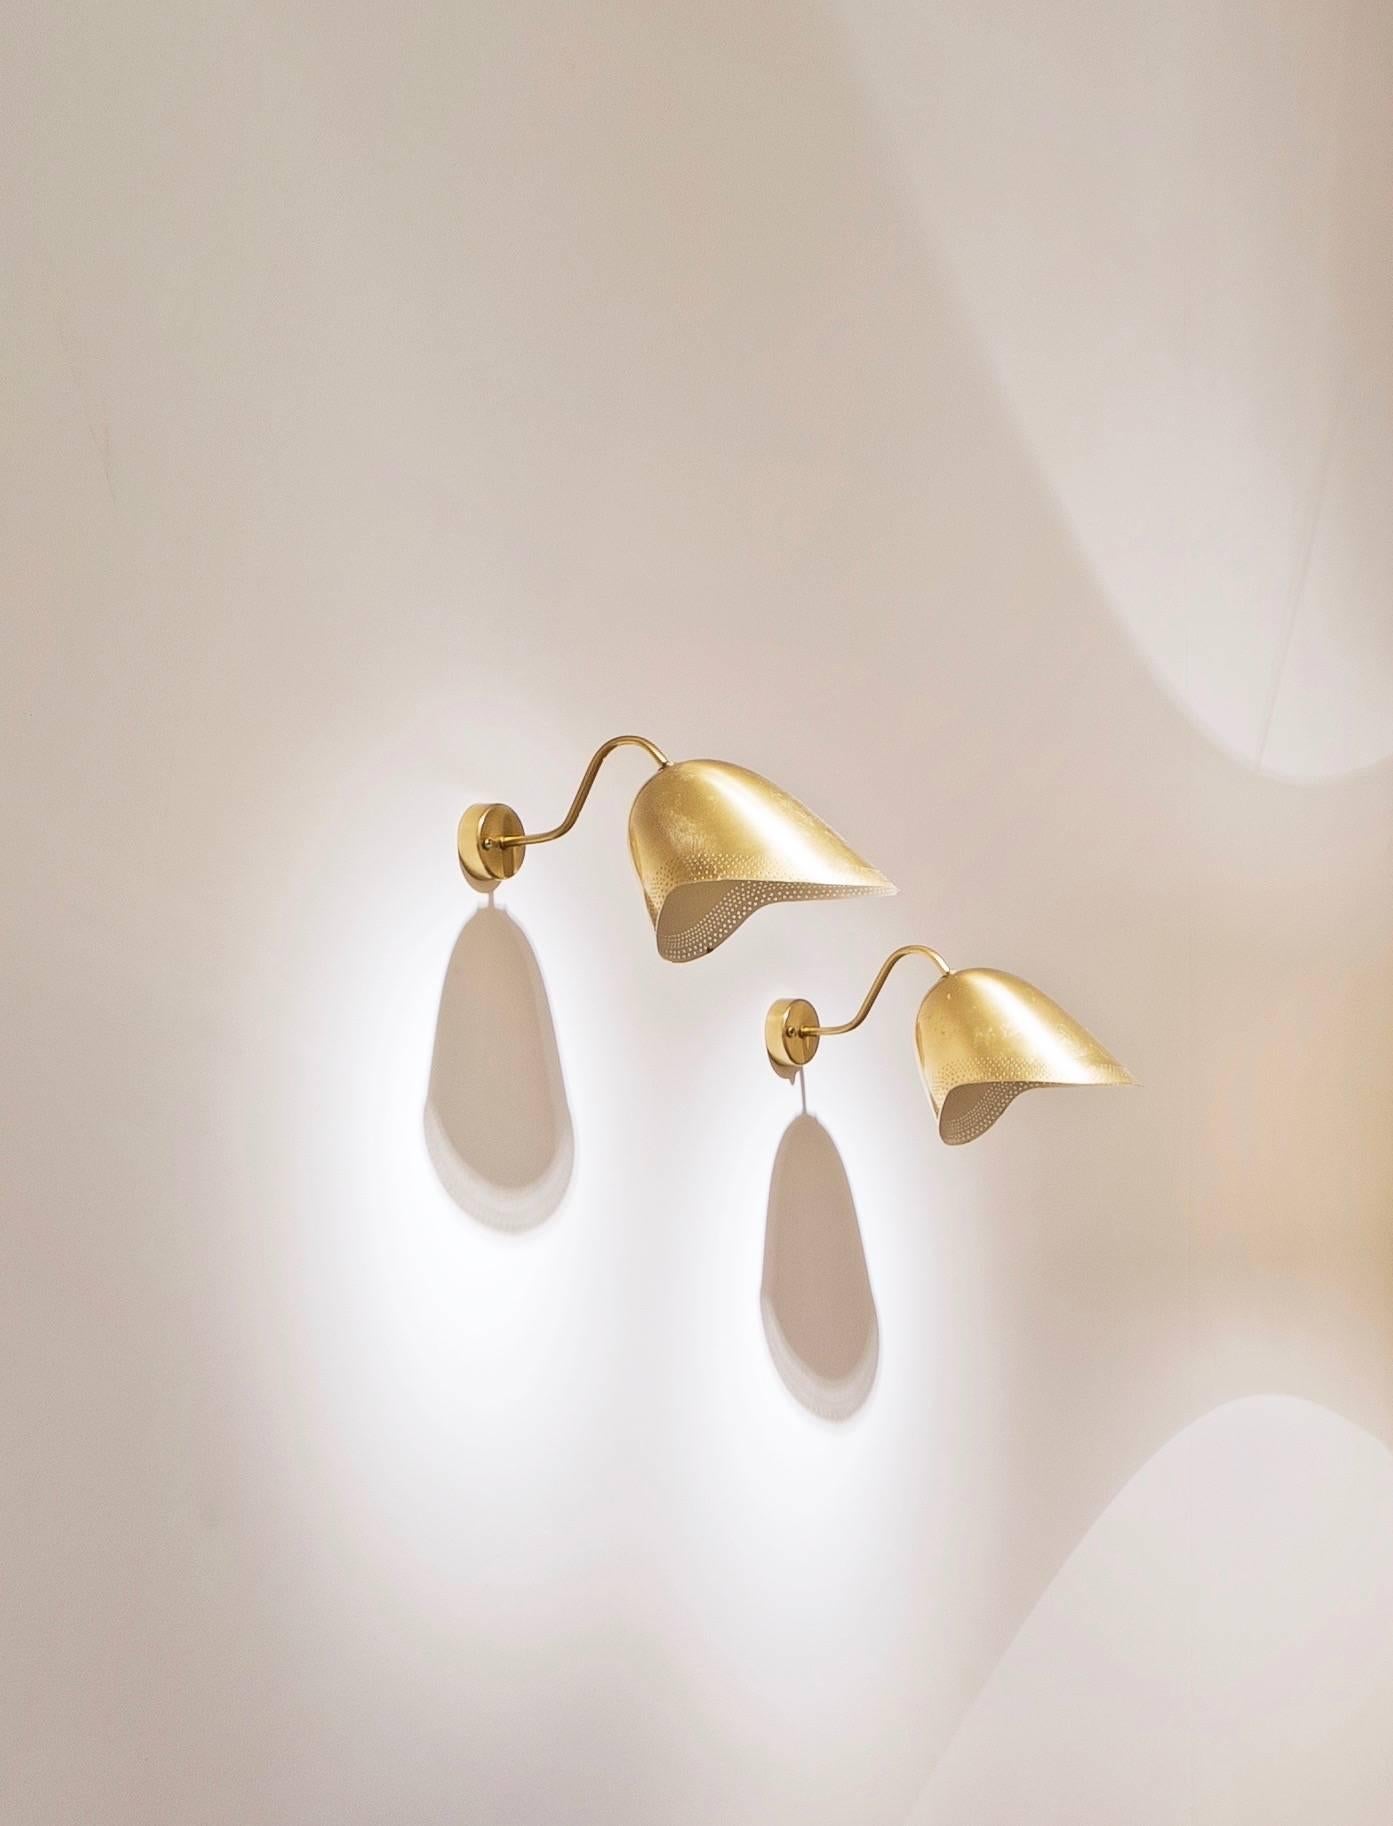 Pair of sconces made in brass perforated on the edges and white lacquered metal.
Edited by Bröderna Malmströms Metavllvarufabrik.

Four sets of two sconces are available.